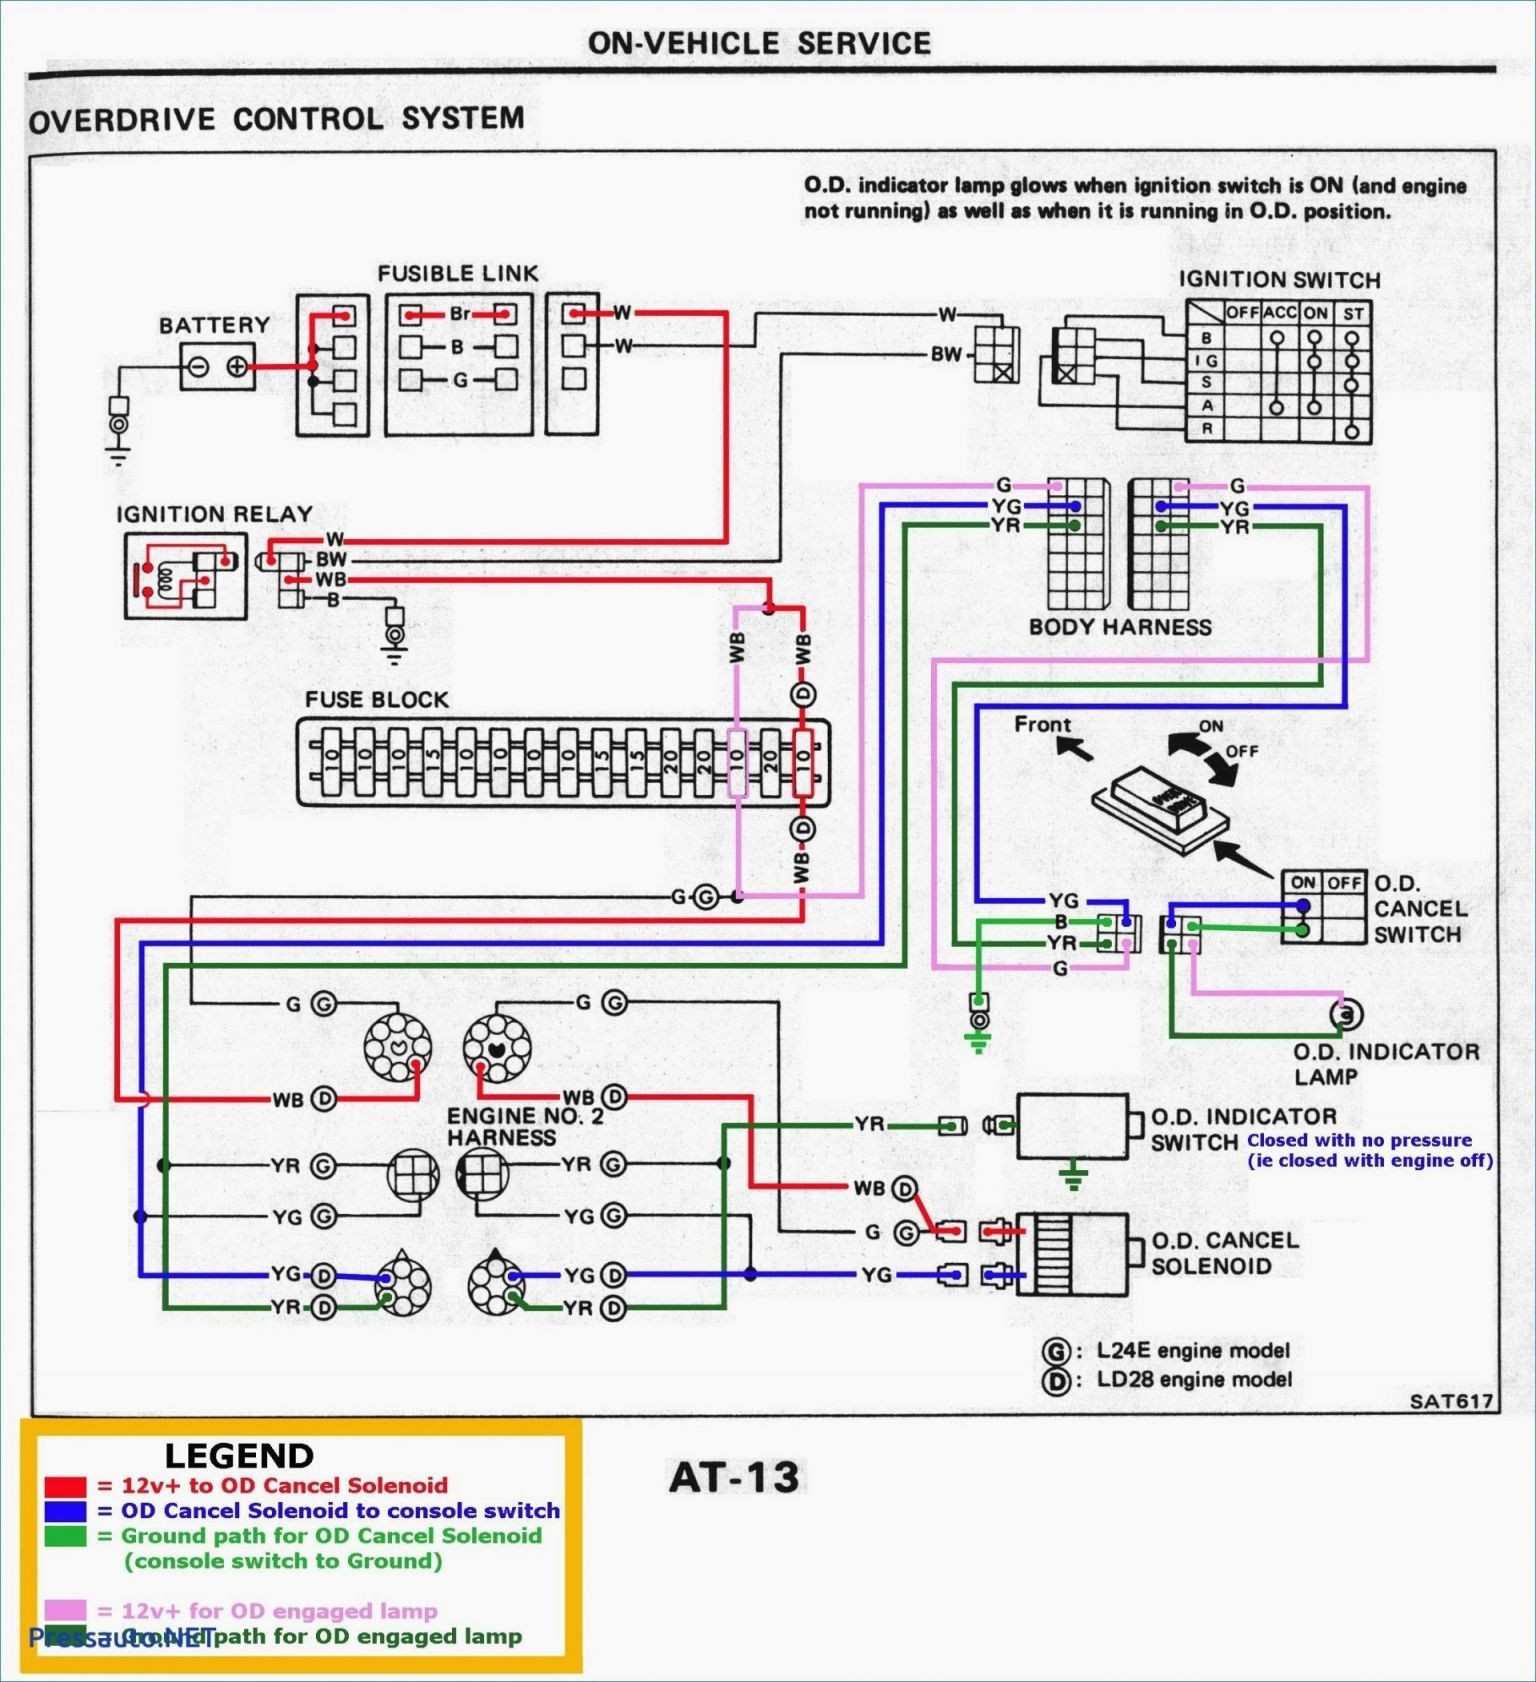 4 Wire Trailer Wiring Diagram Unique Wiring Diagram for Boat Trailer Plug top Rated Harbor Freight